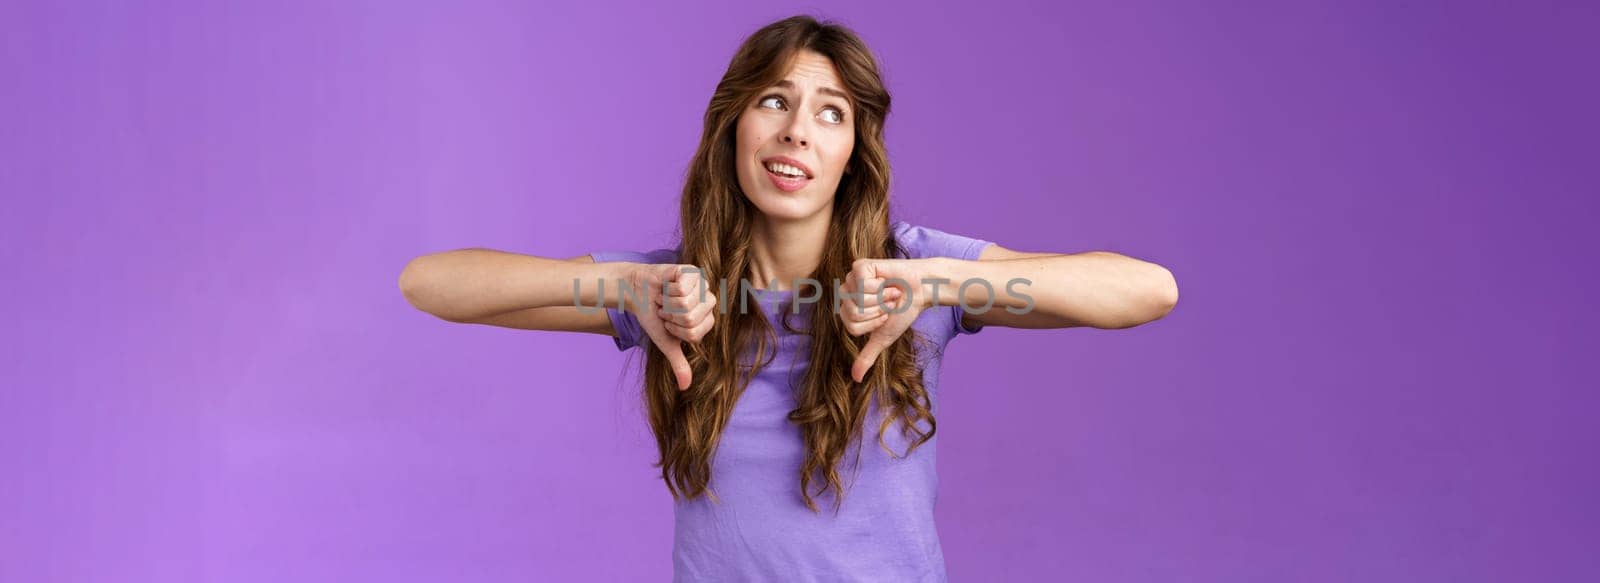 Unimpressed ignorant snobbish attractive curly-haired girl disagree lame idea look away disappointed show thumbs down dislike disapproval gesture not interested upset purple background.